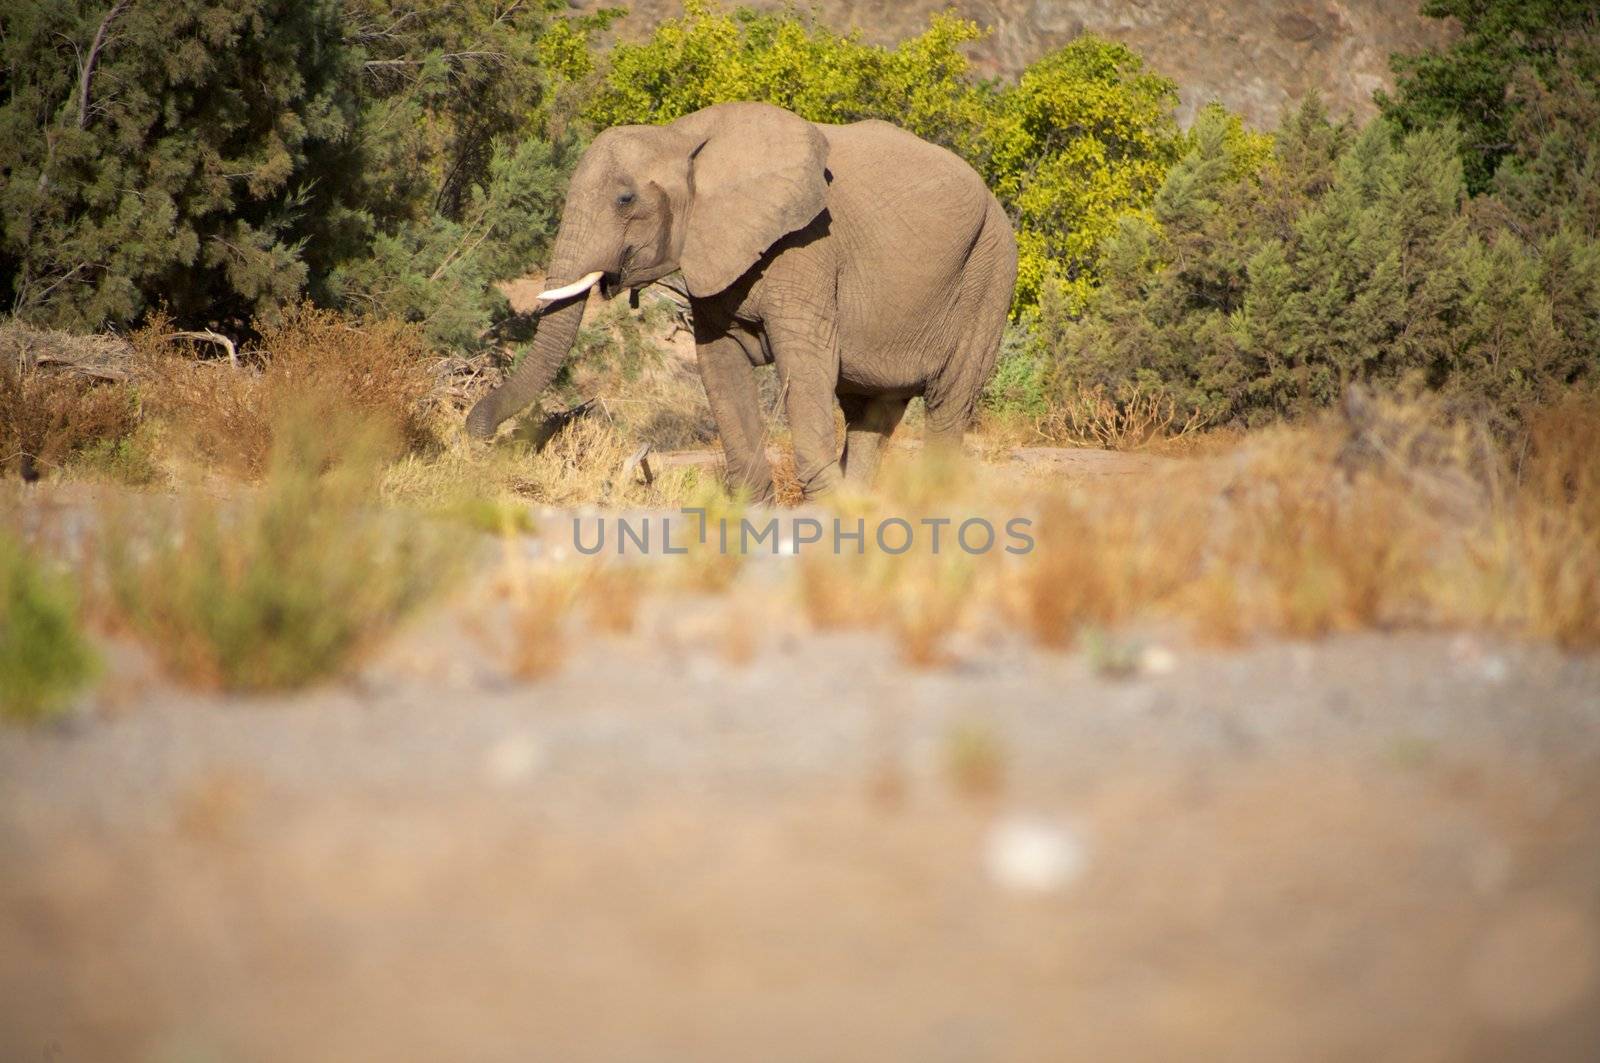 Elephant eating in a river bed in the Skeleton Coast Desert, Namibia